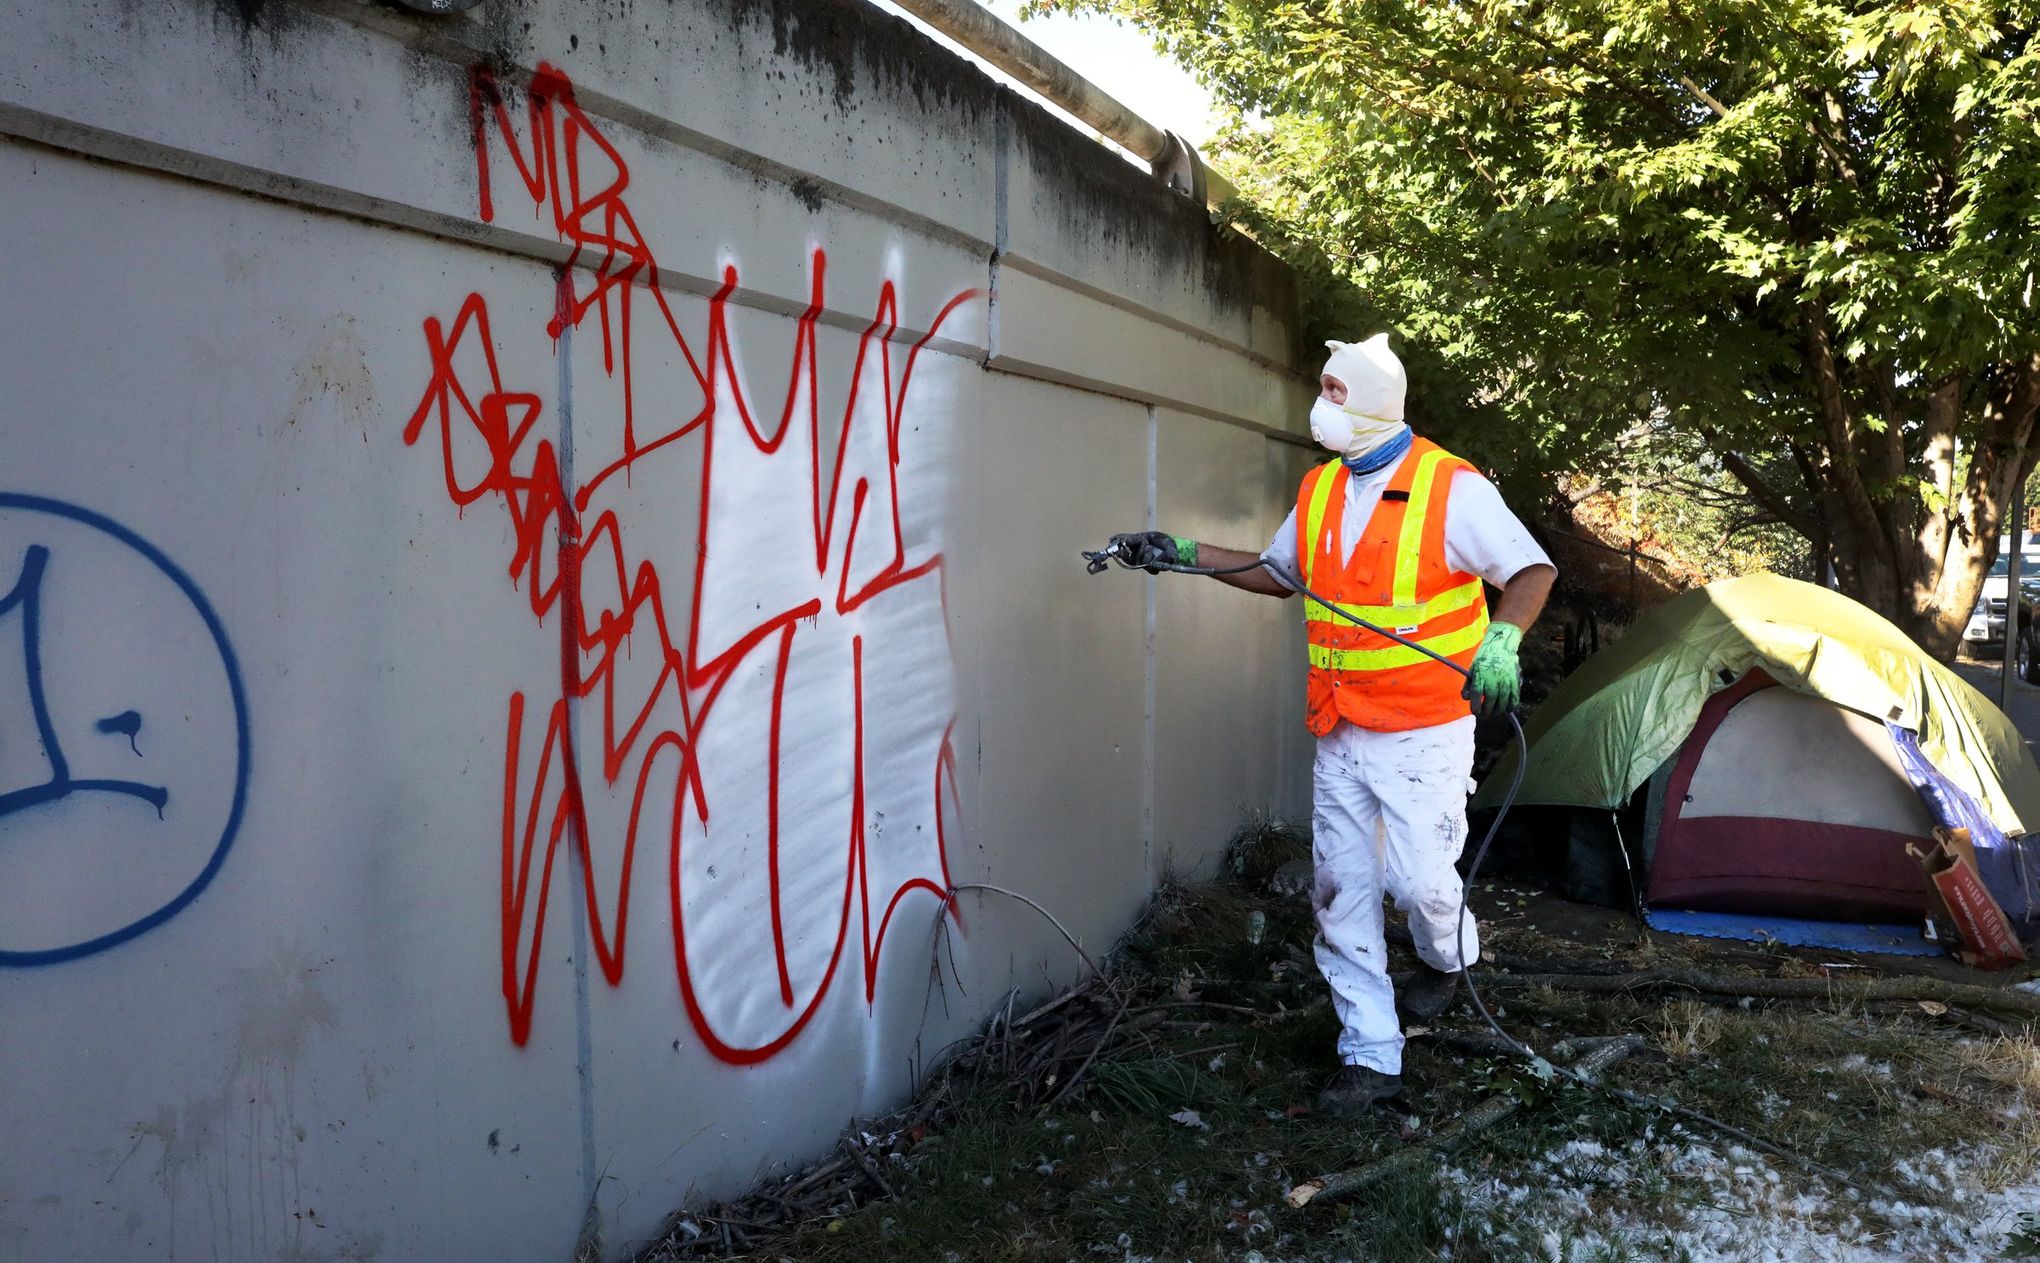 Graffiti Artists Have Moral Rights - The Authors Guild